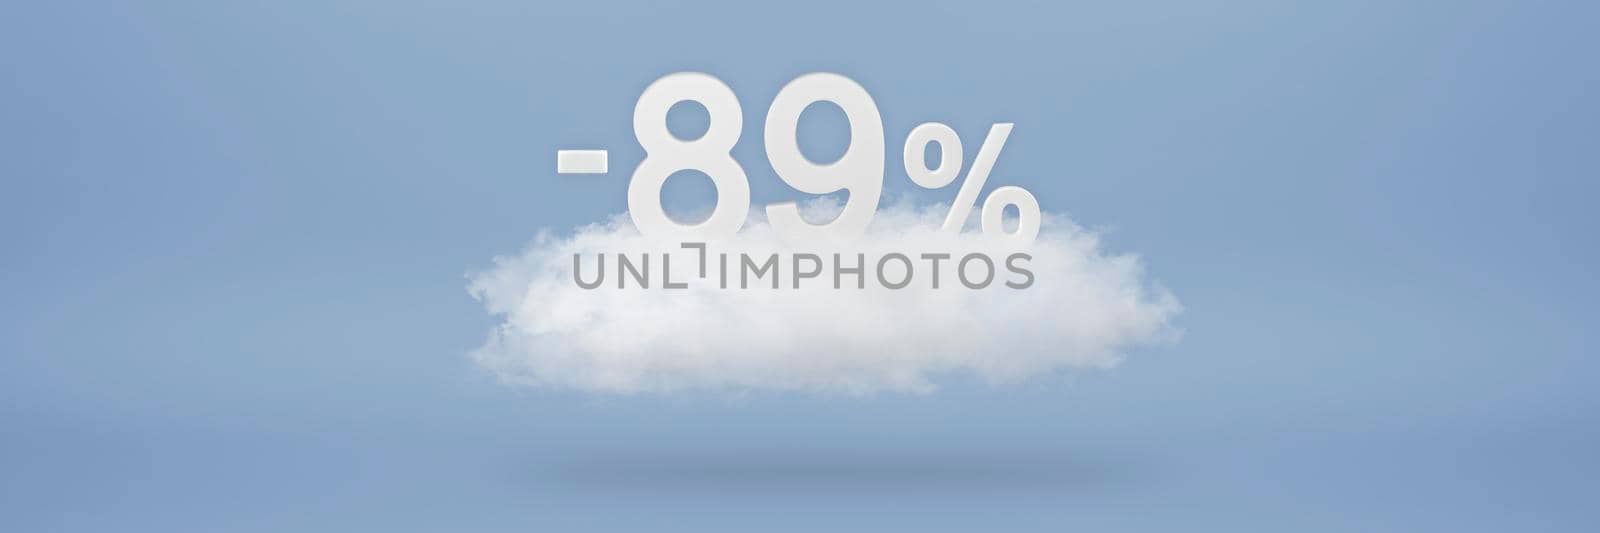 Discount 89 percent. Big discounts, sale up to eighty nine percent. 3D numbers float on a cloud on a blue background. Copy space. Advertising banner and poster to be inserted into the project.